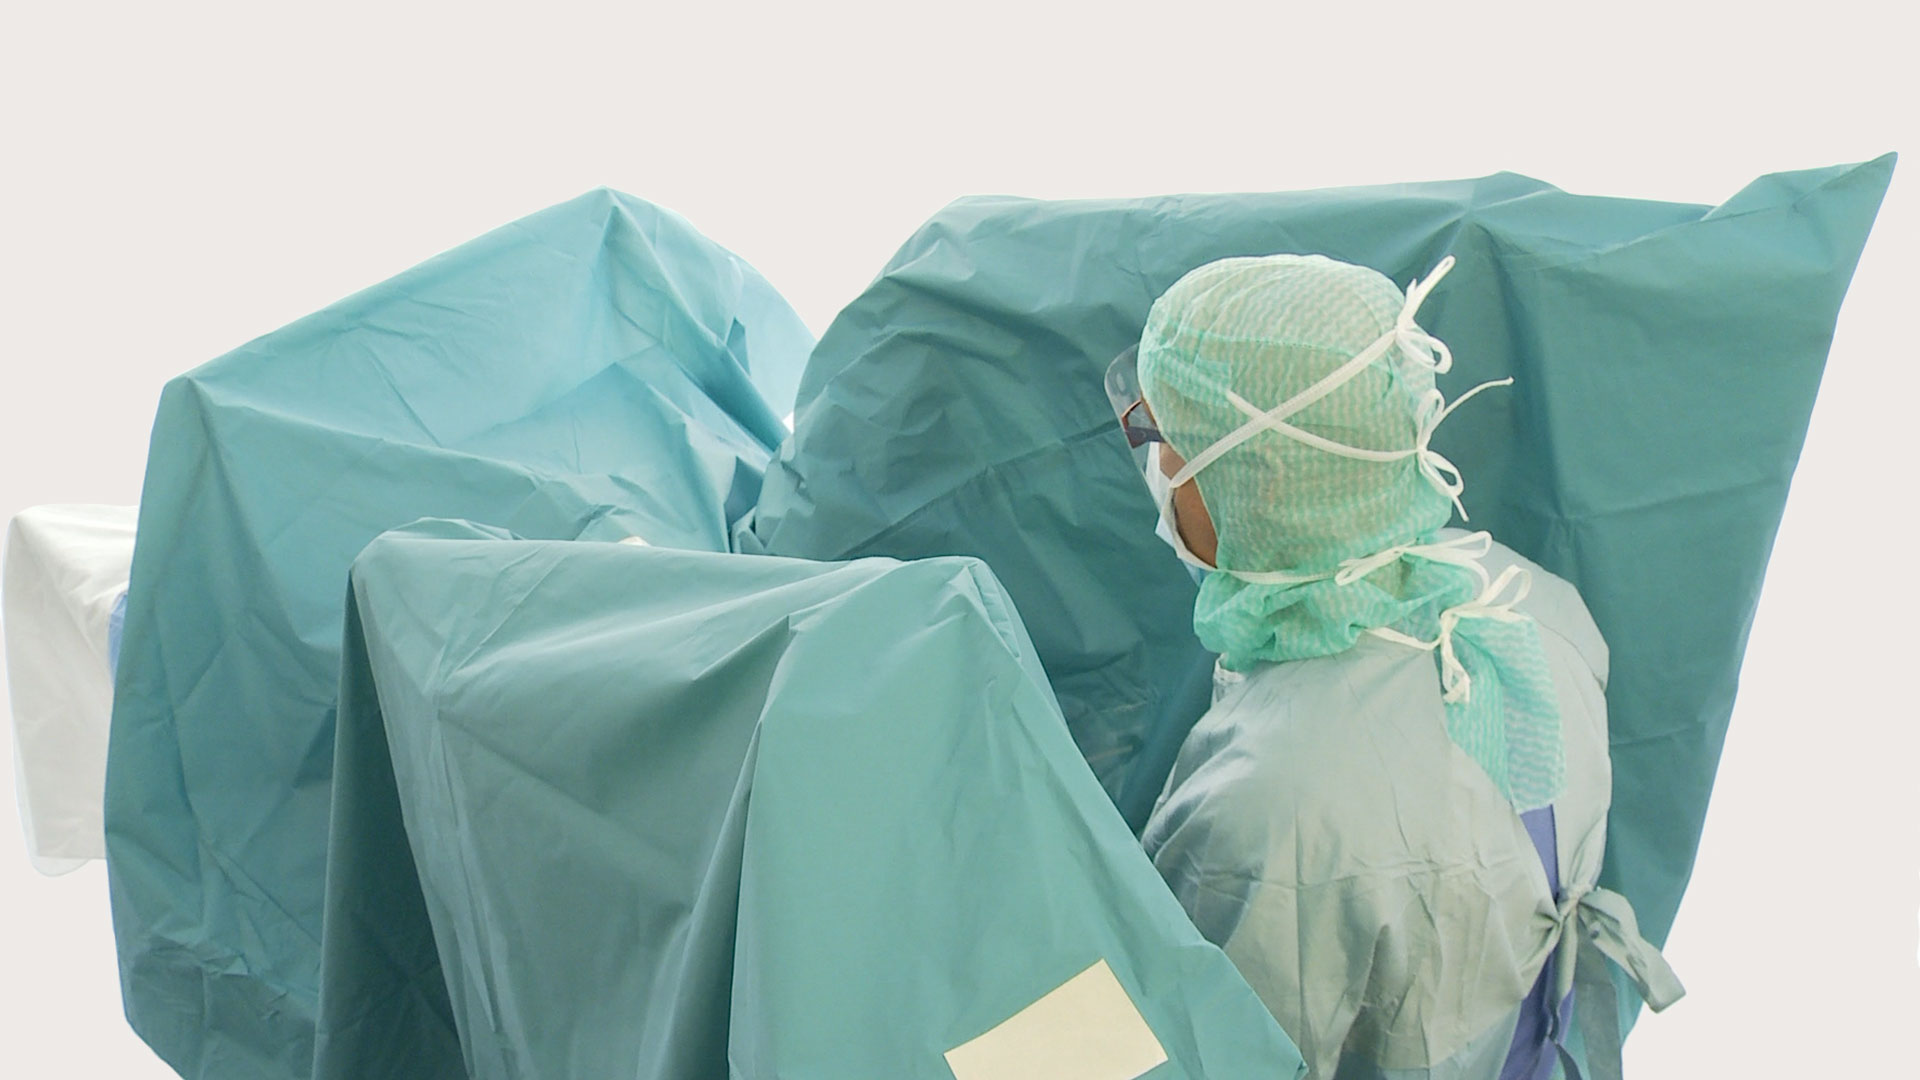 a BARRIER urology drape in use during an operation